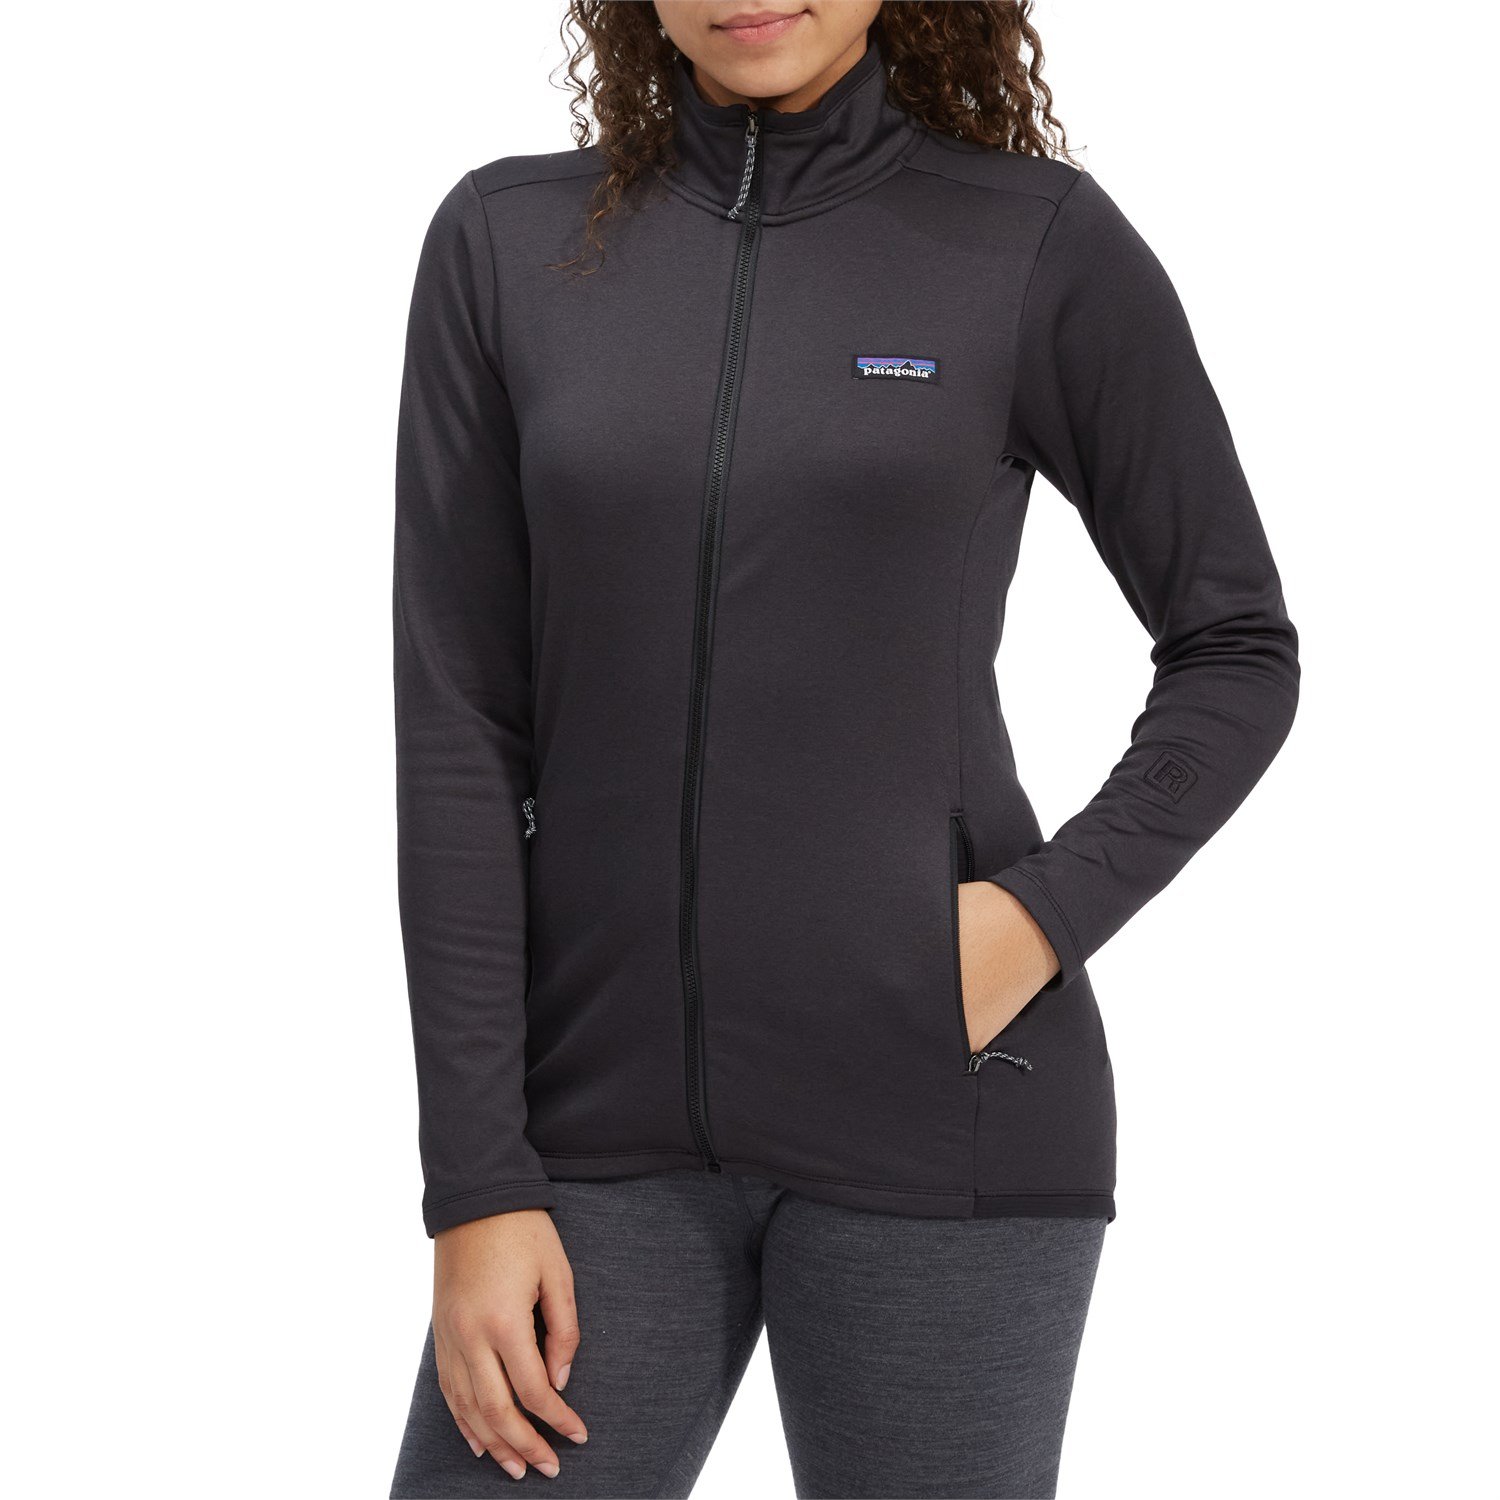 Patagonia Women's R1 Daily Zip Neck Jacket Dick's Sporting, 52% OFF